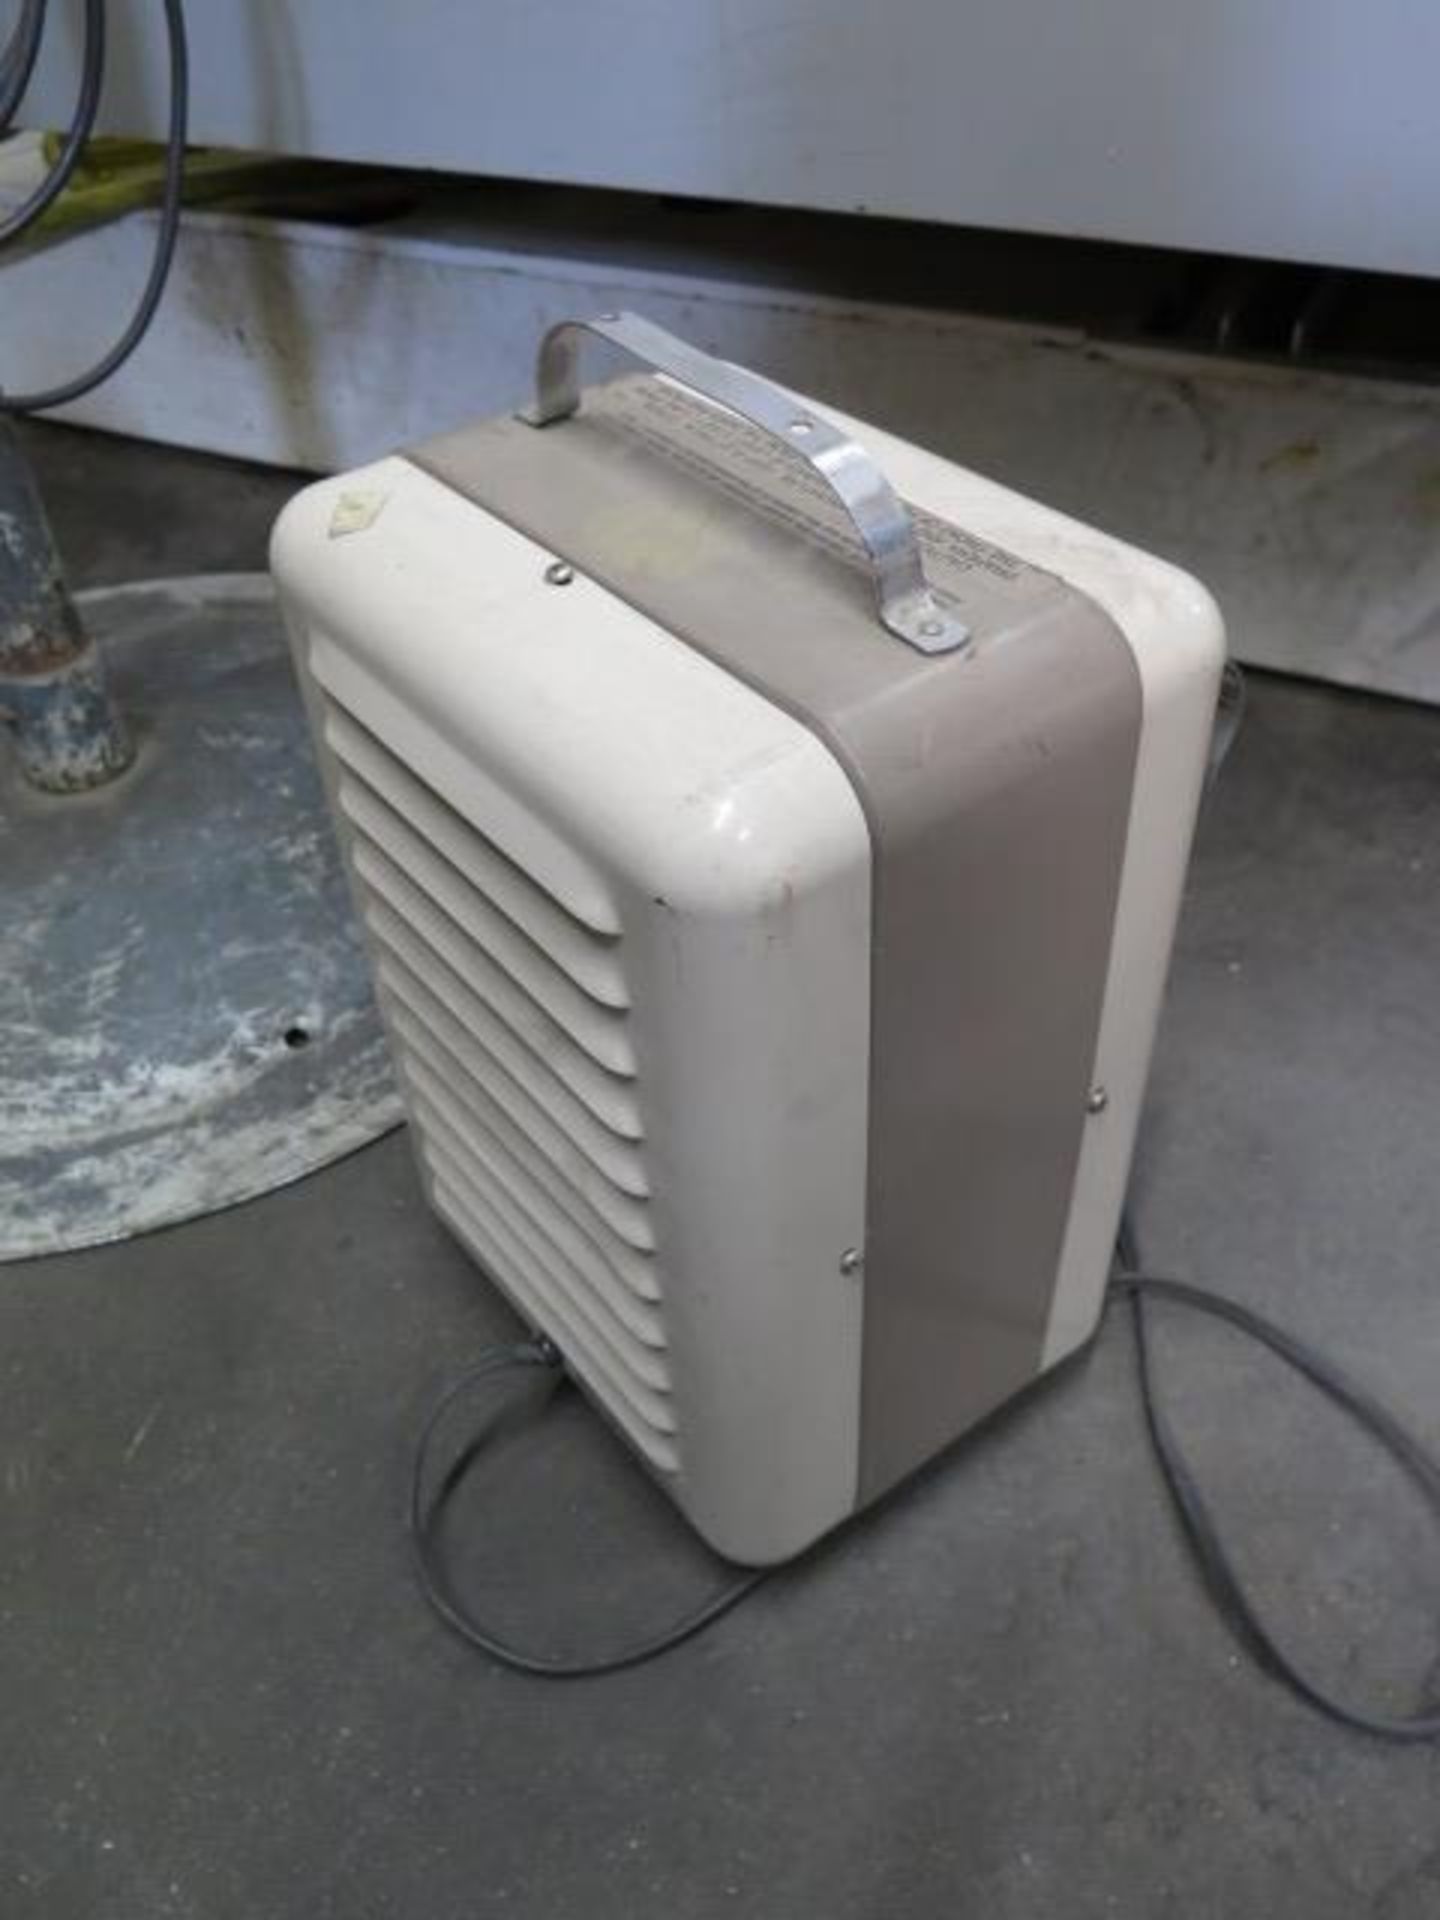 Shop Fan and Propane Heaters (SOLD AS-IS - NO WARRANTY) - Image 8 of 8